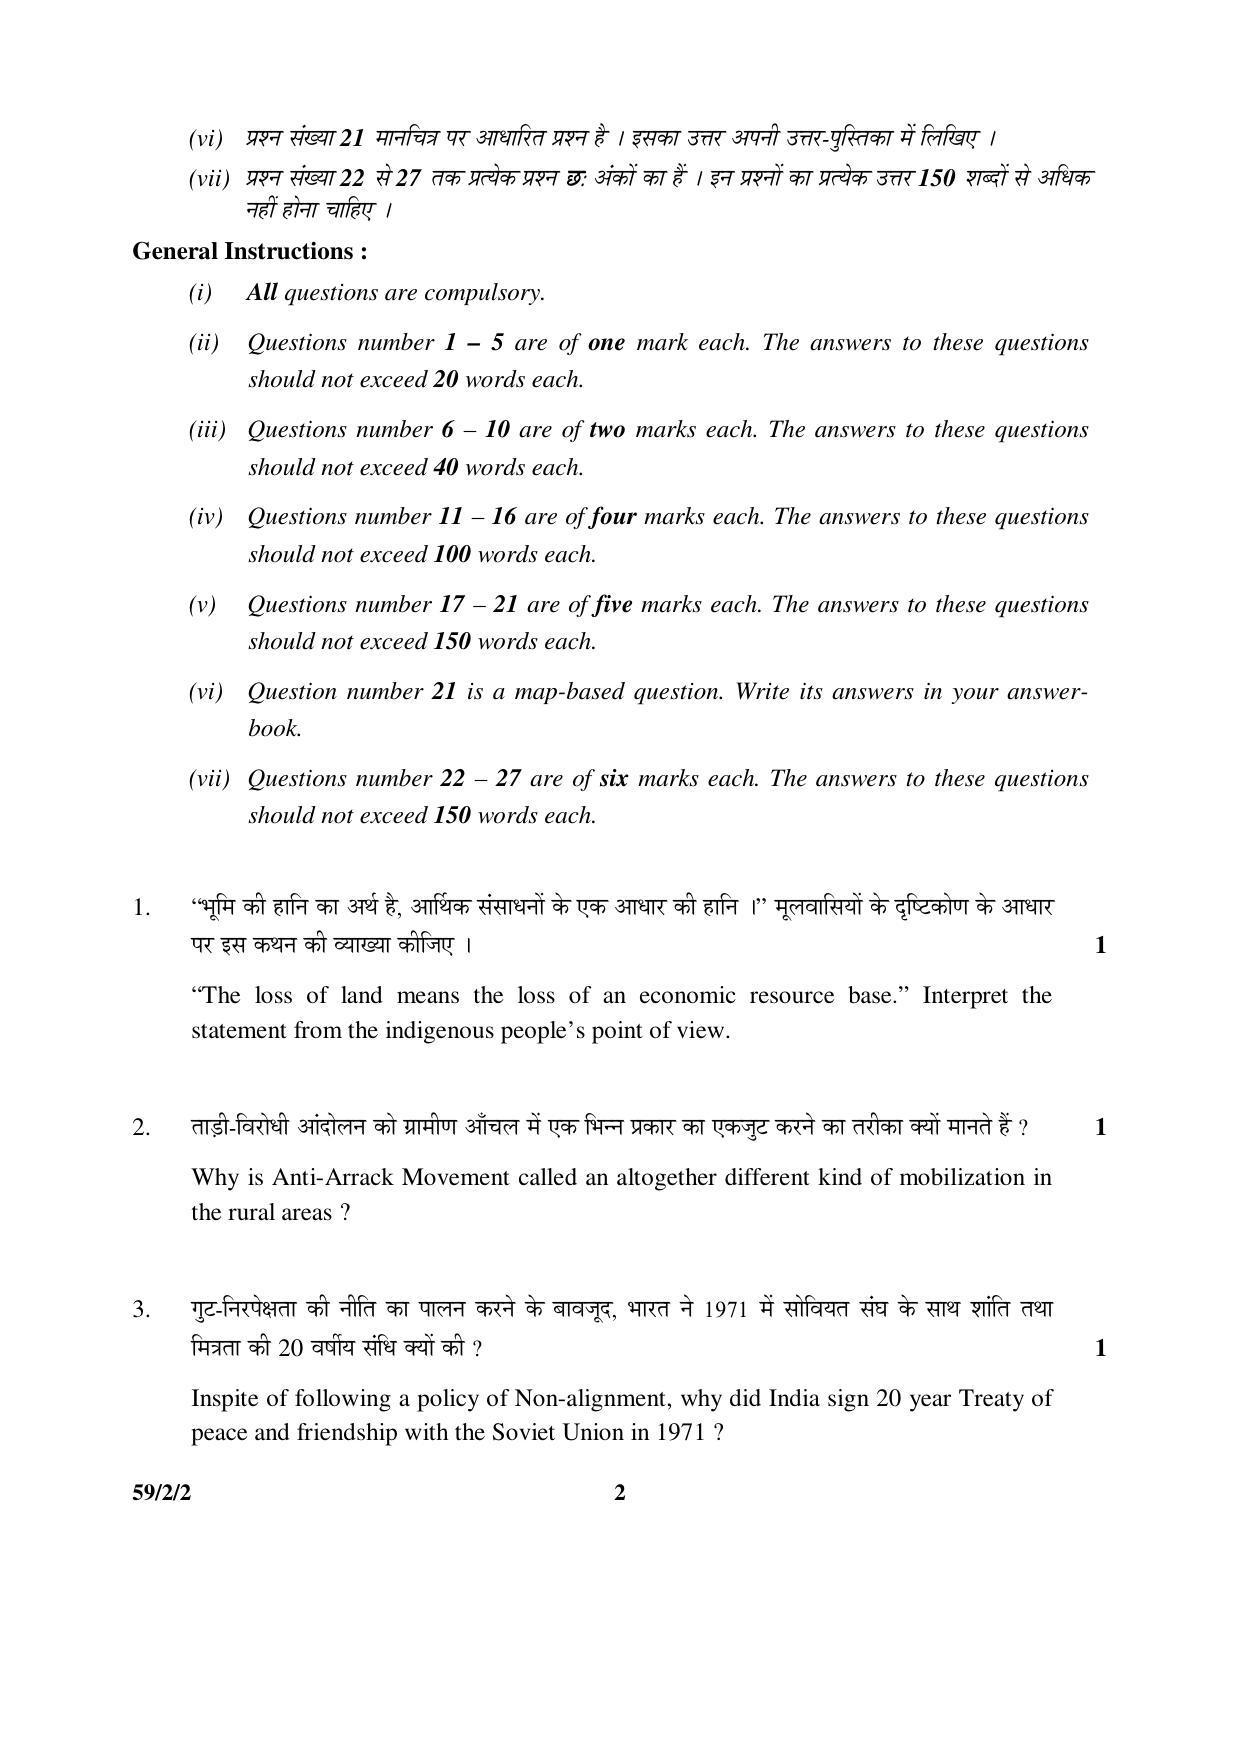 CBSE Class 12 59-2-2 _Political Science 2016 Question Paper - Page 2